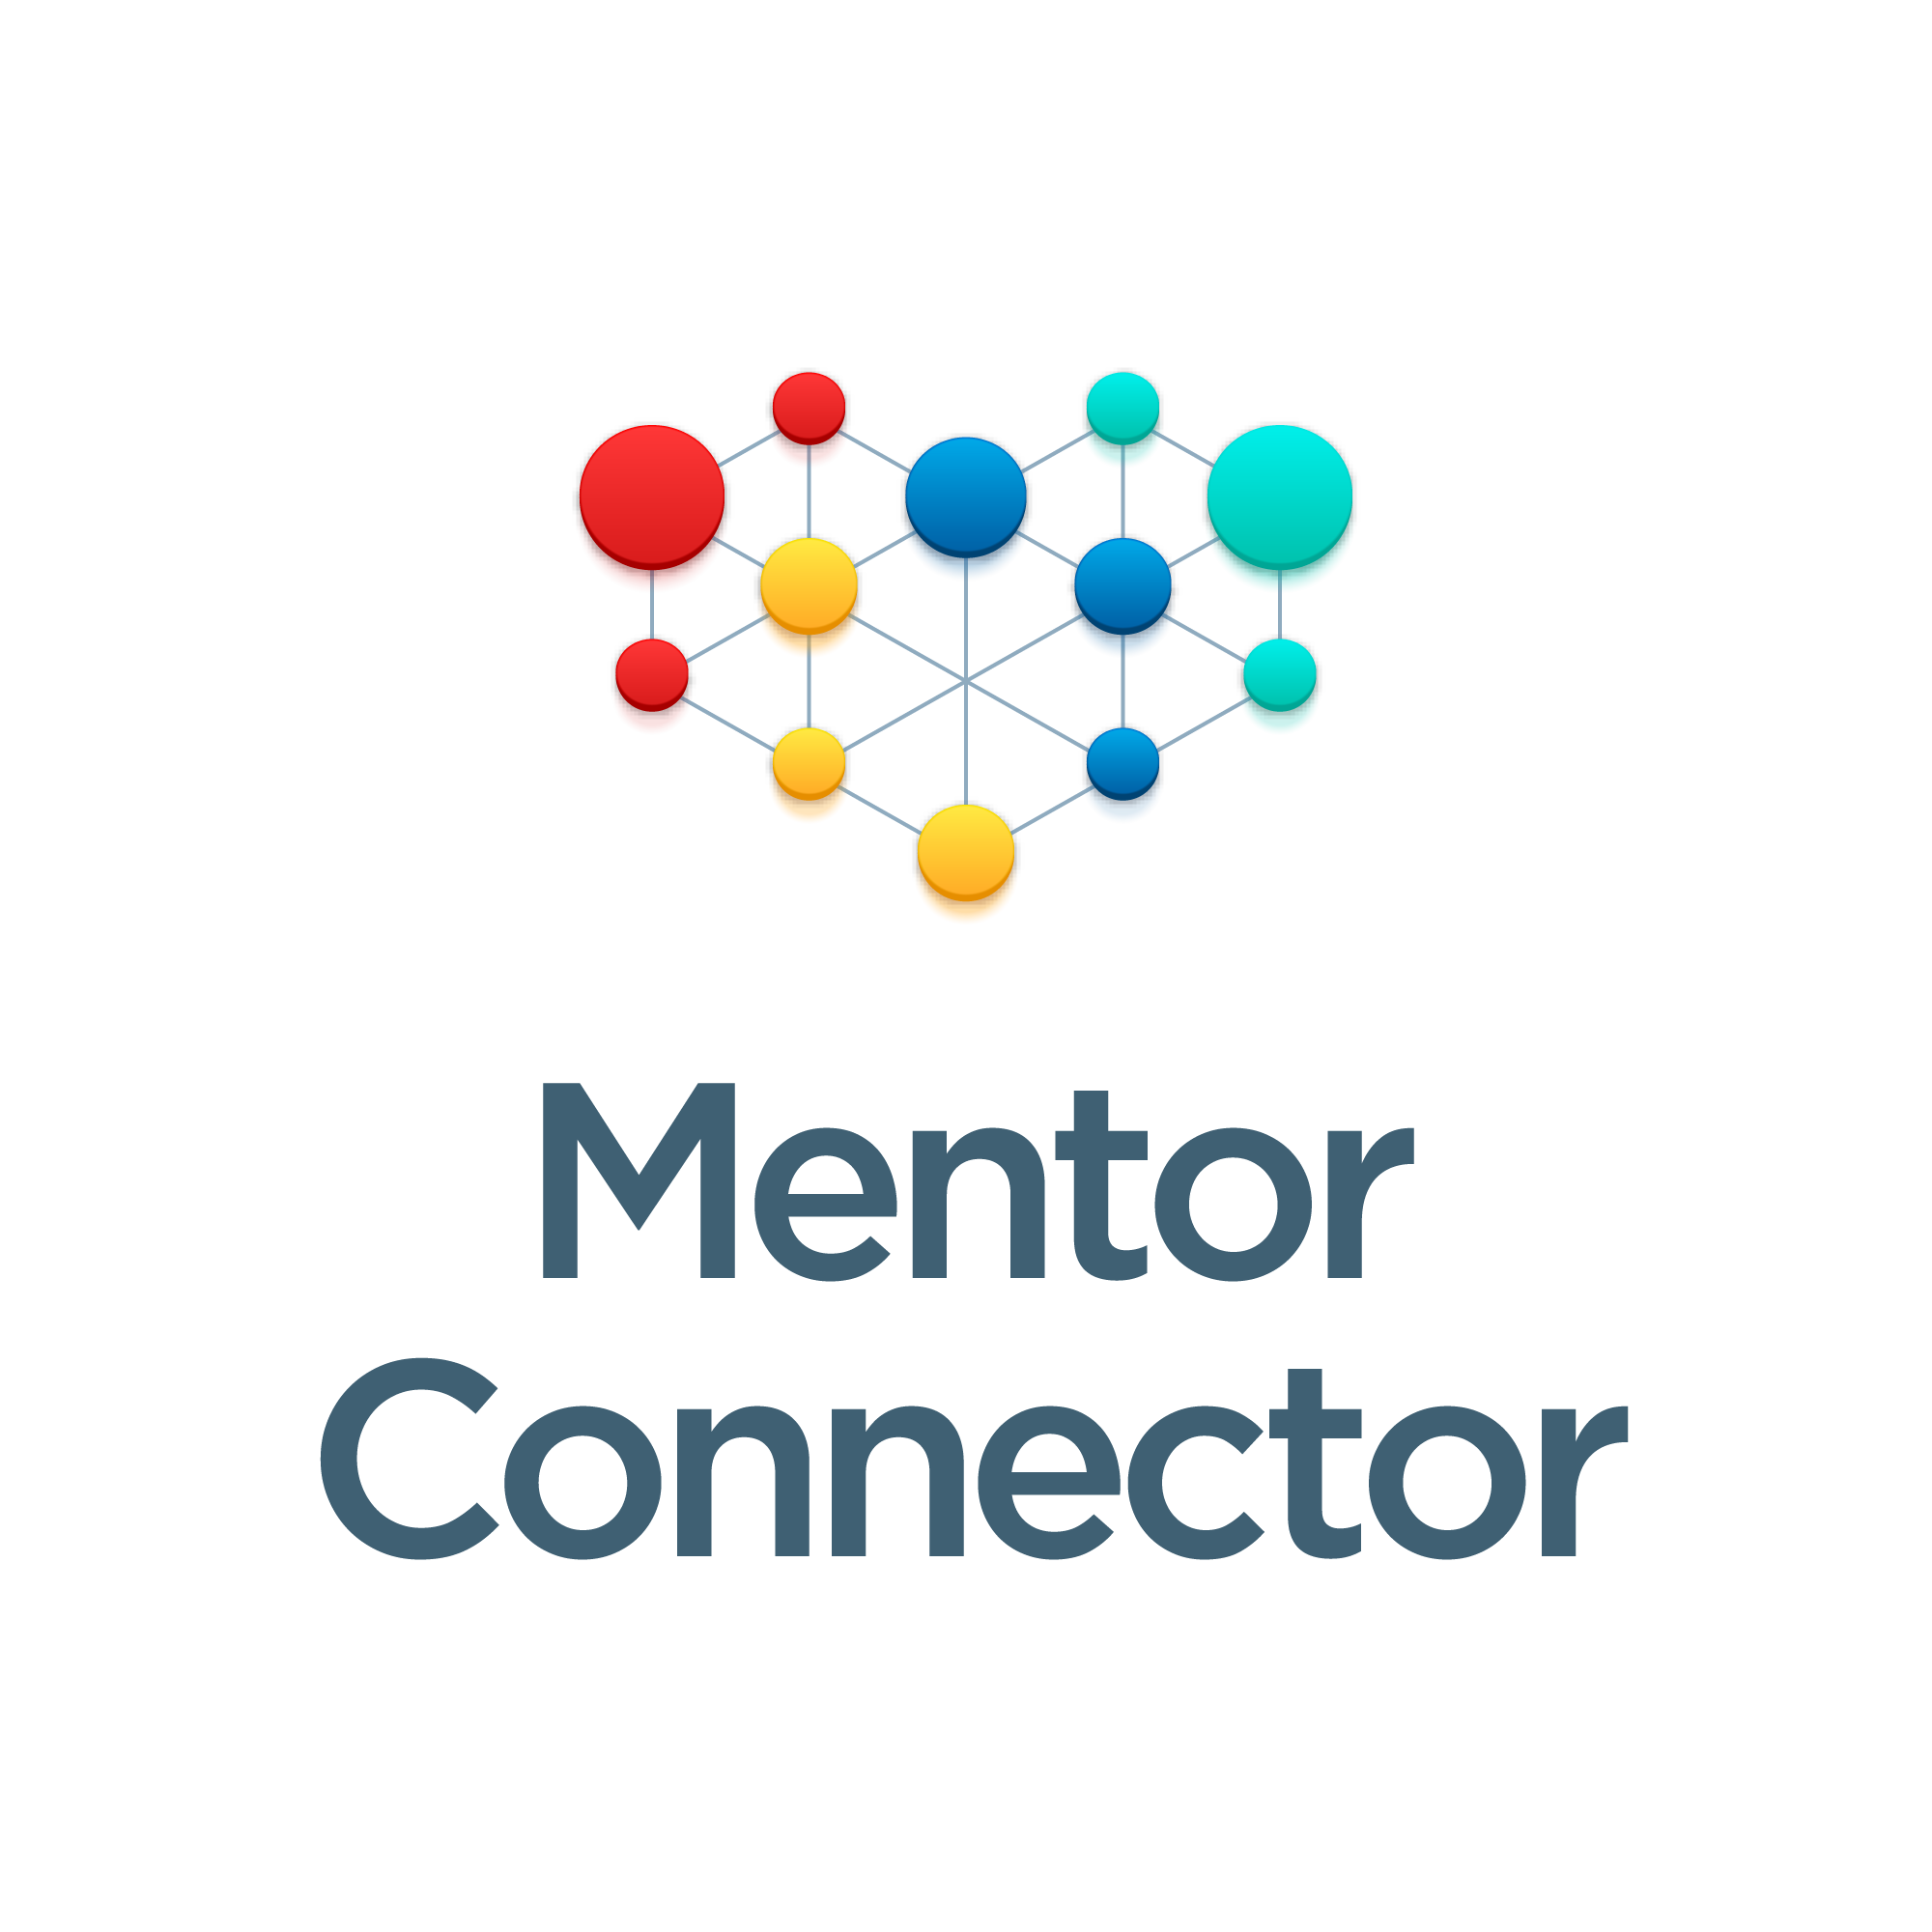 Introducing Mentor Connector